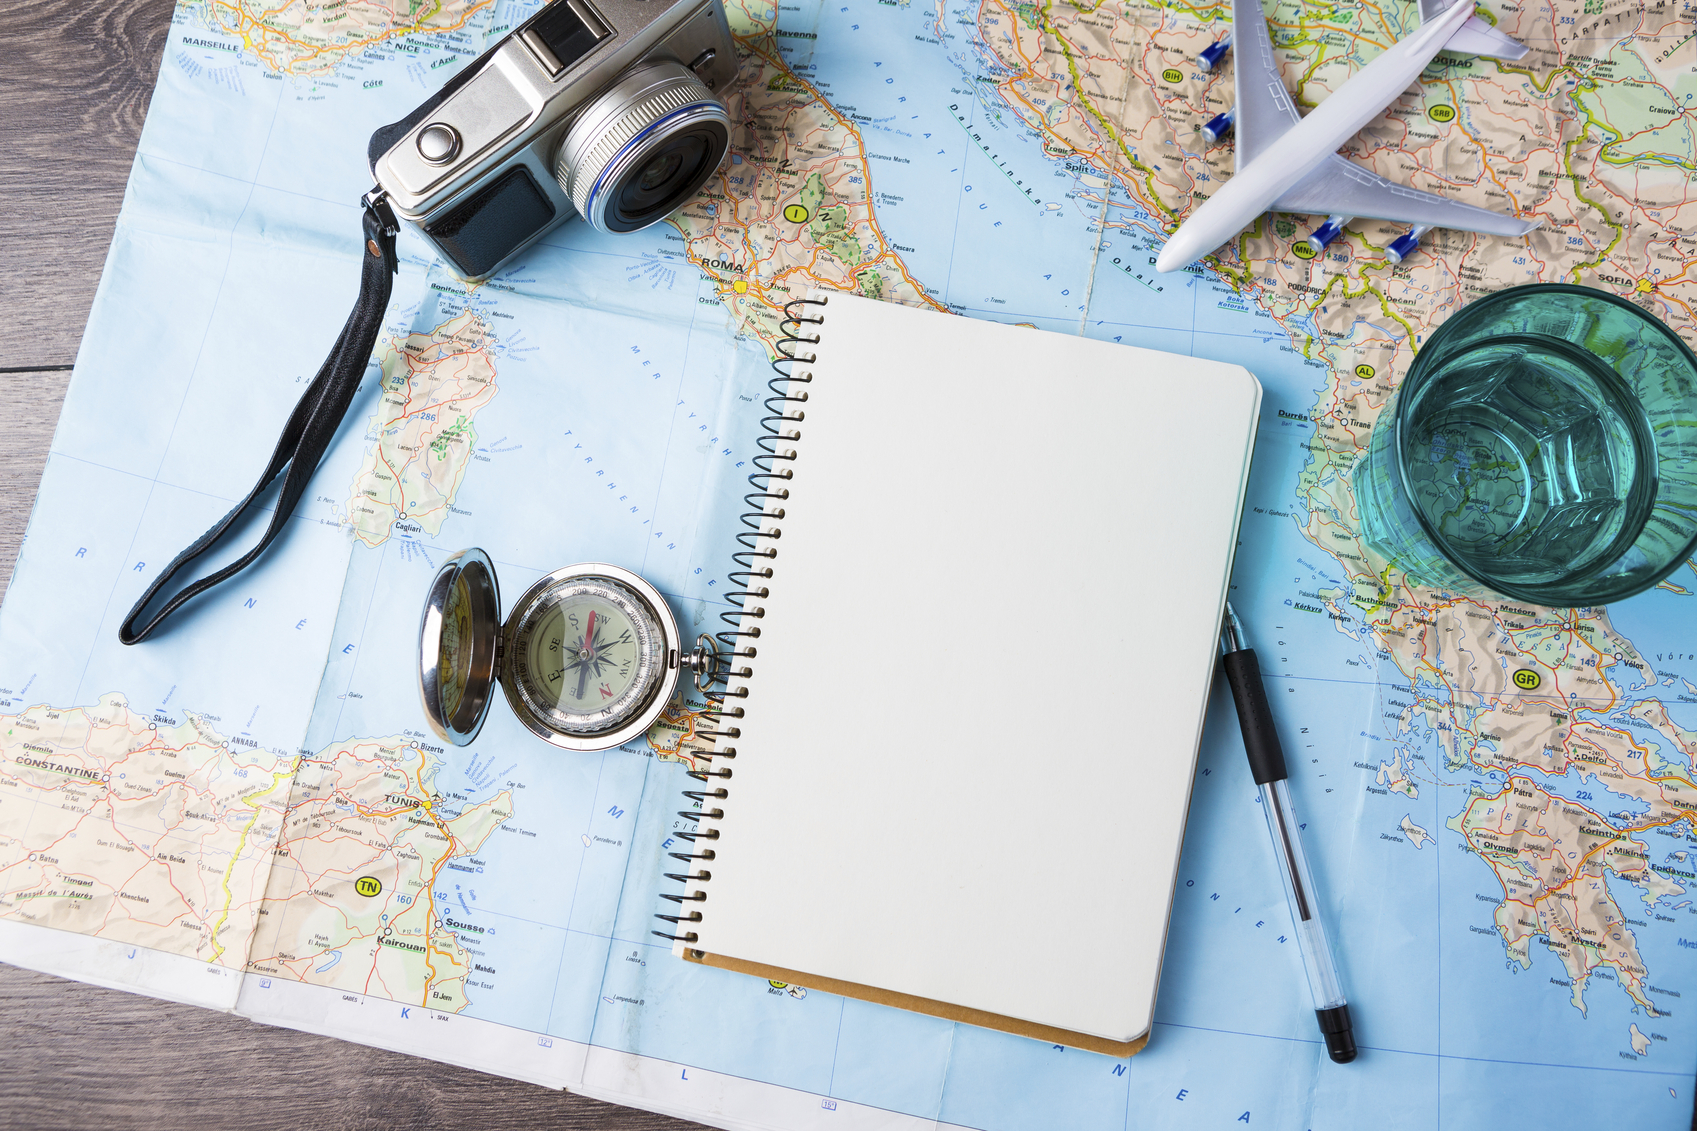 travel tourism agency table mockup tools compass, glass of water note pad, pen and toy airplane and touristic map on wooden table. Empty space you can place your text or information.